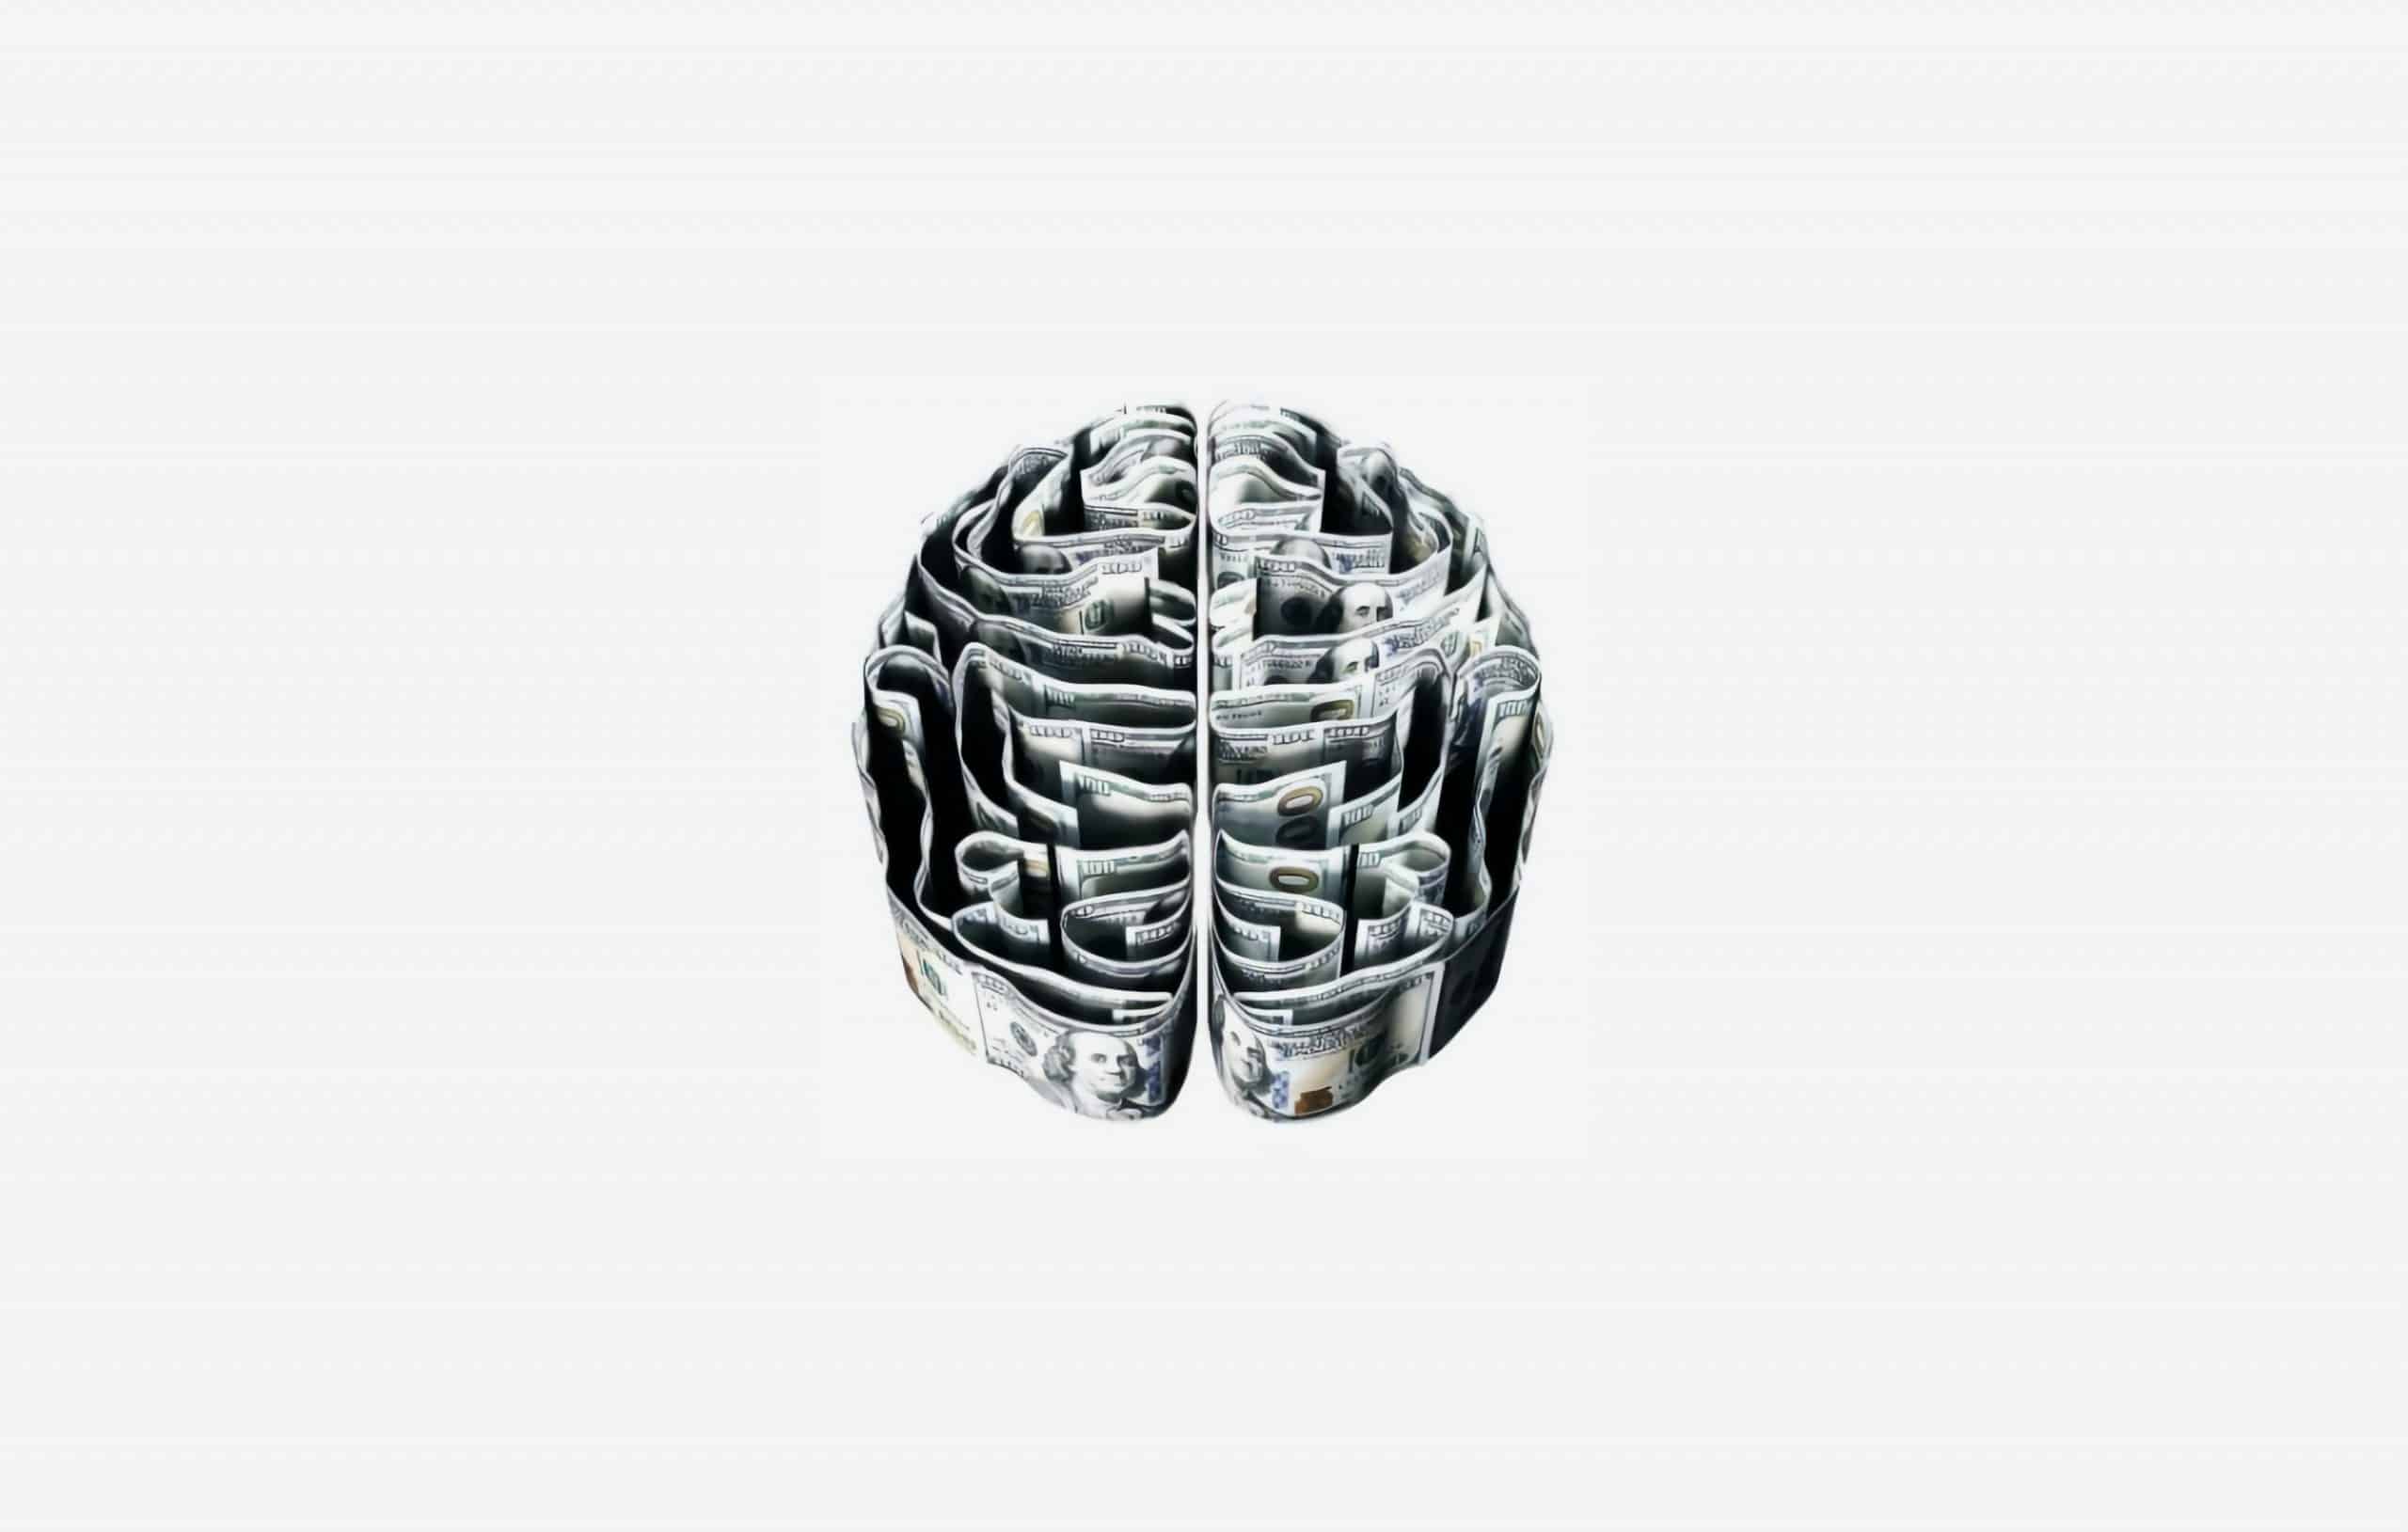 Model of brain made from dollars.